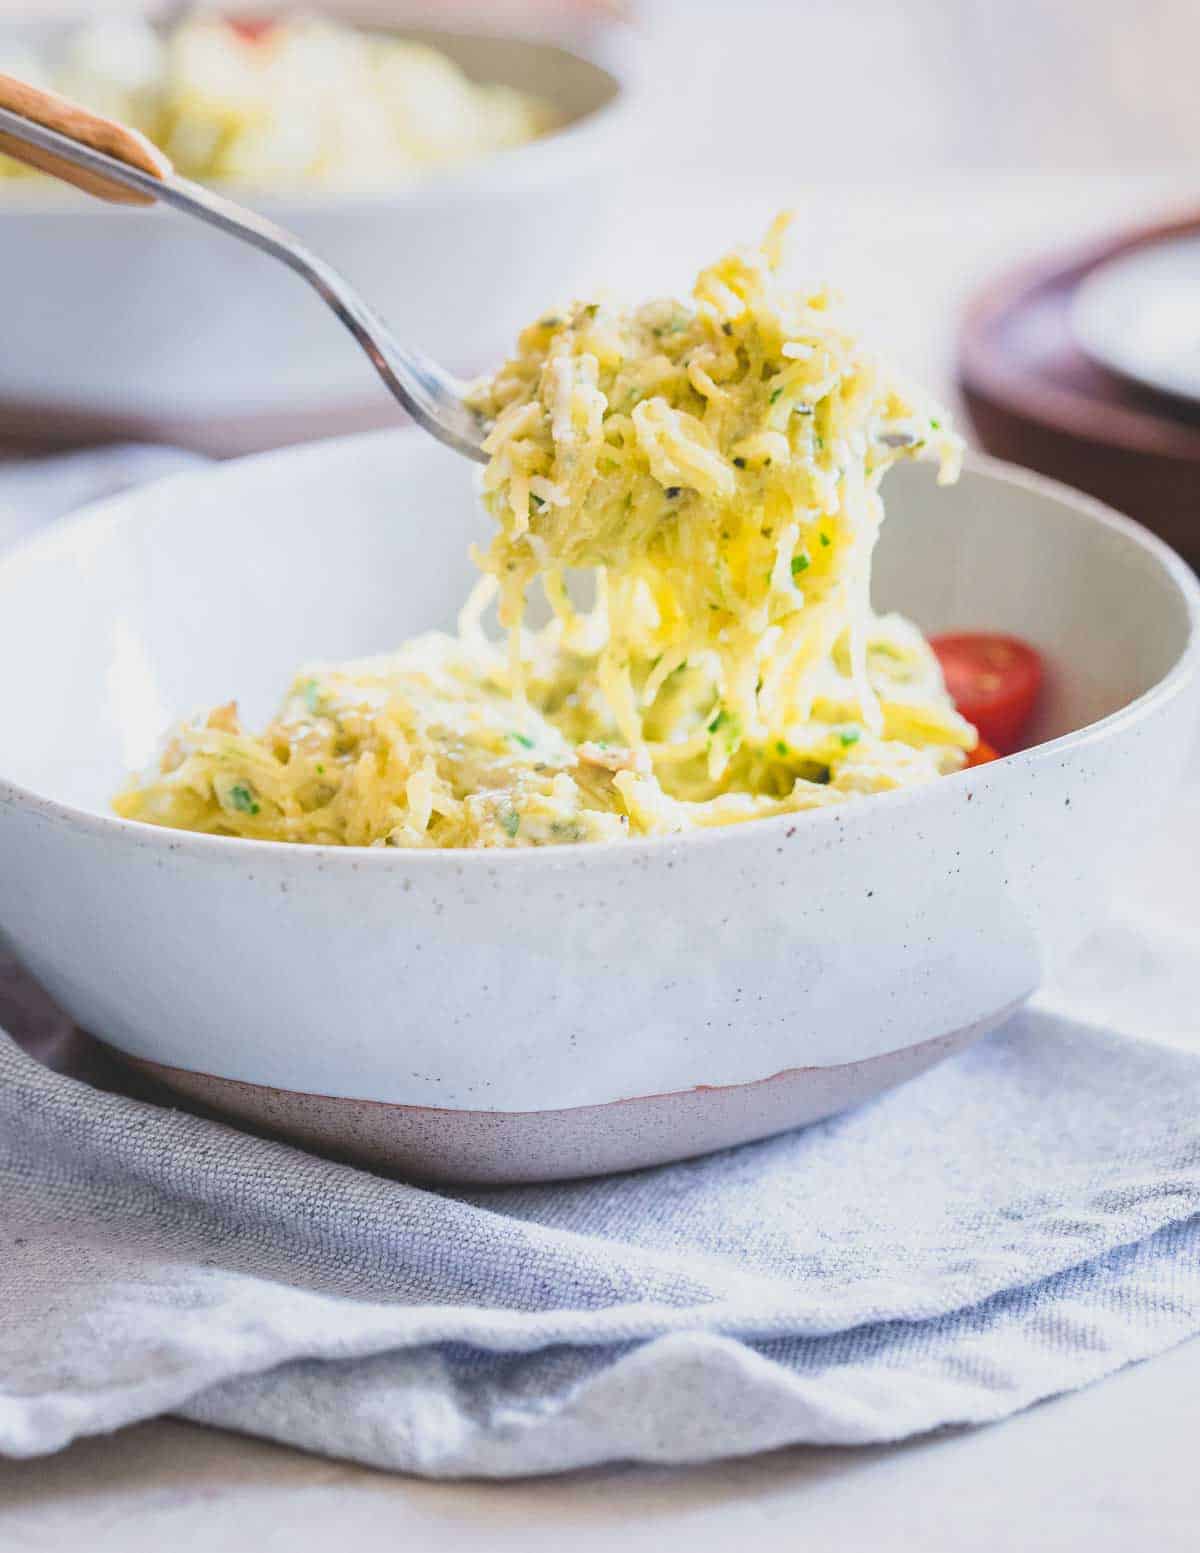 Enjoy the creaminess of a pesto pasta dish with spaghetti squash noodles for a healthier twist.